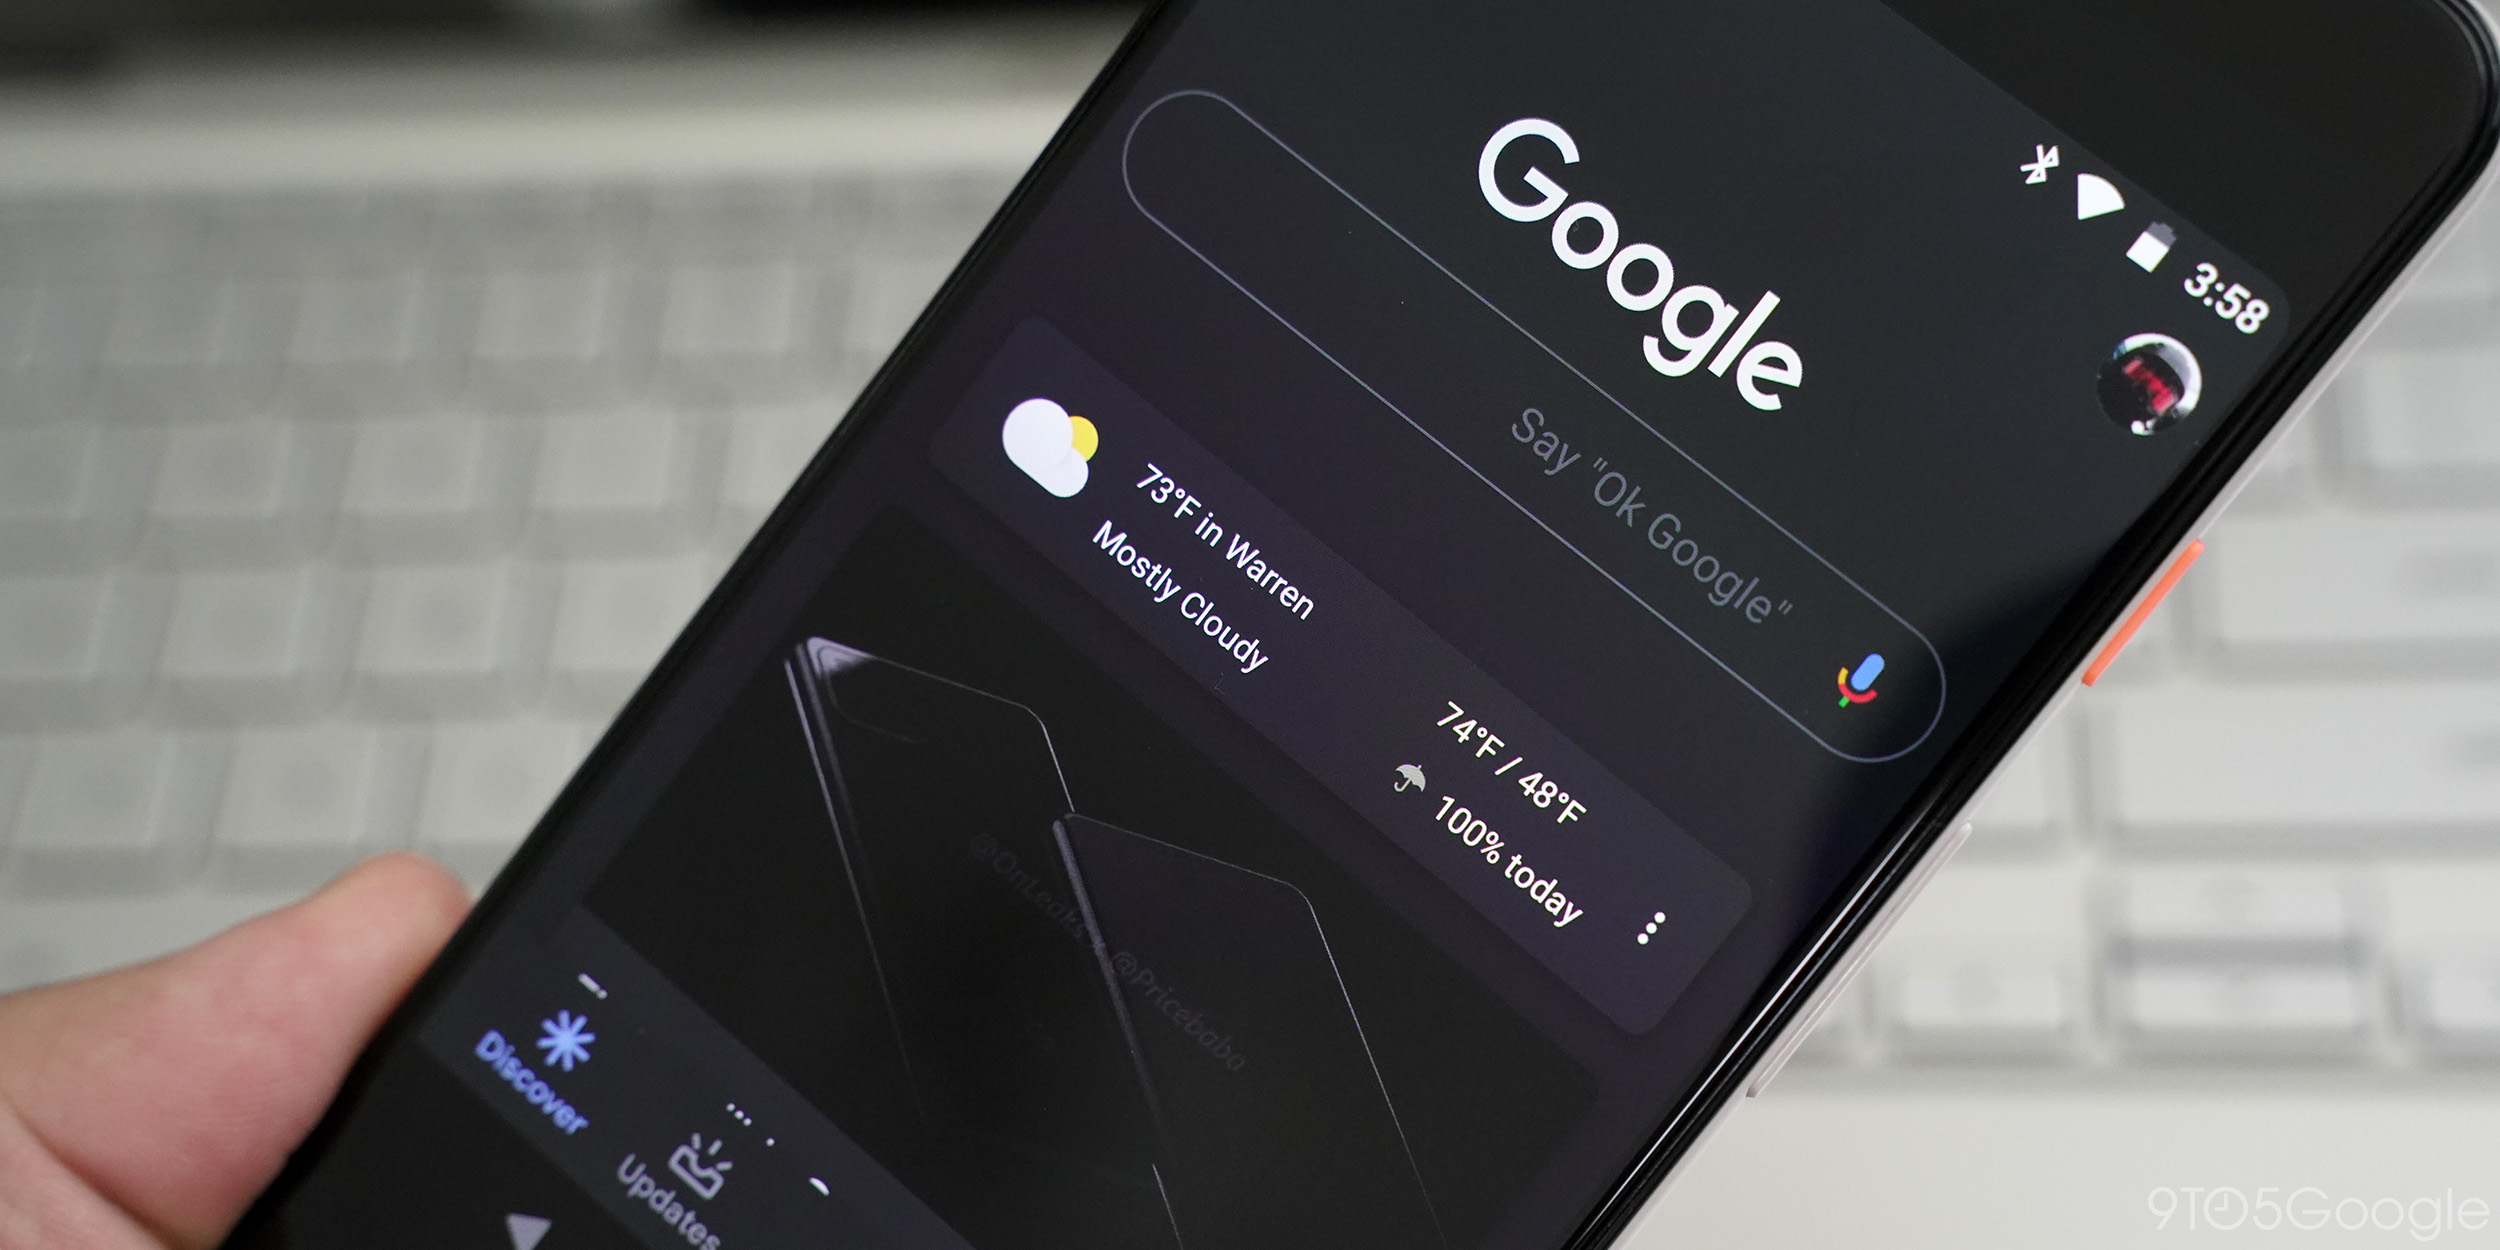 Google app testing dark theme for Search, Discover [Gallery] - 9to5Google